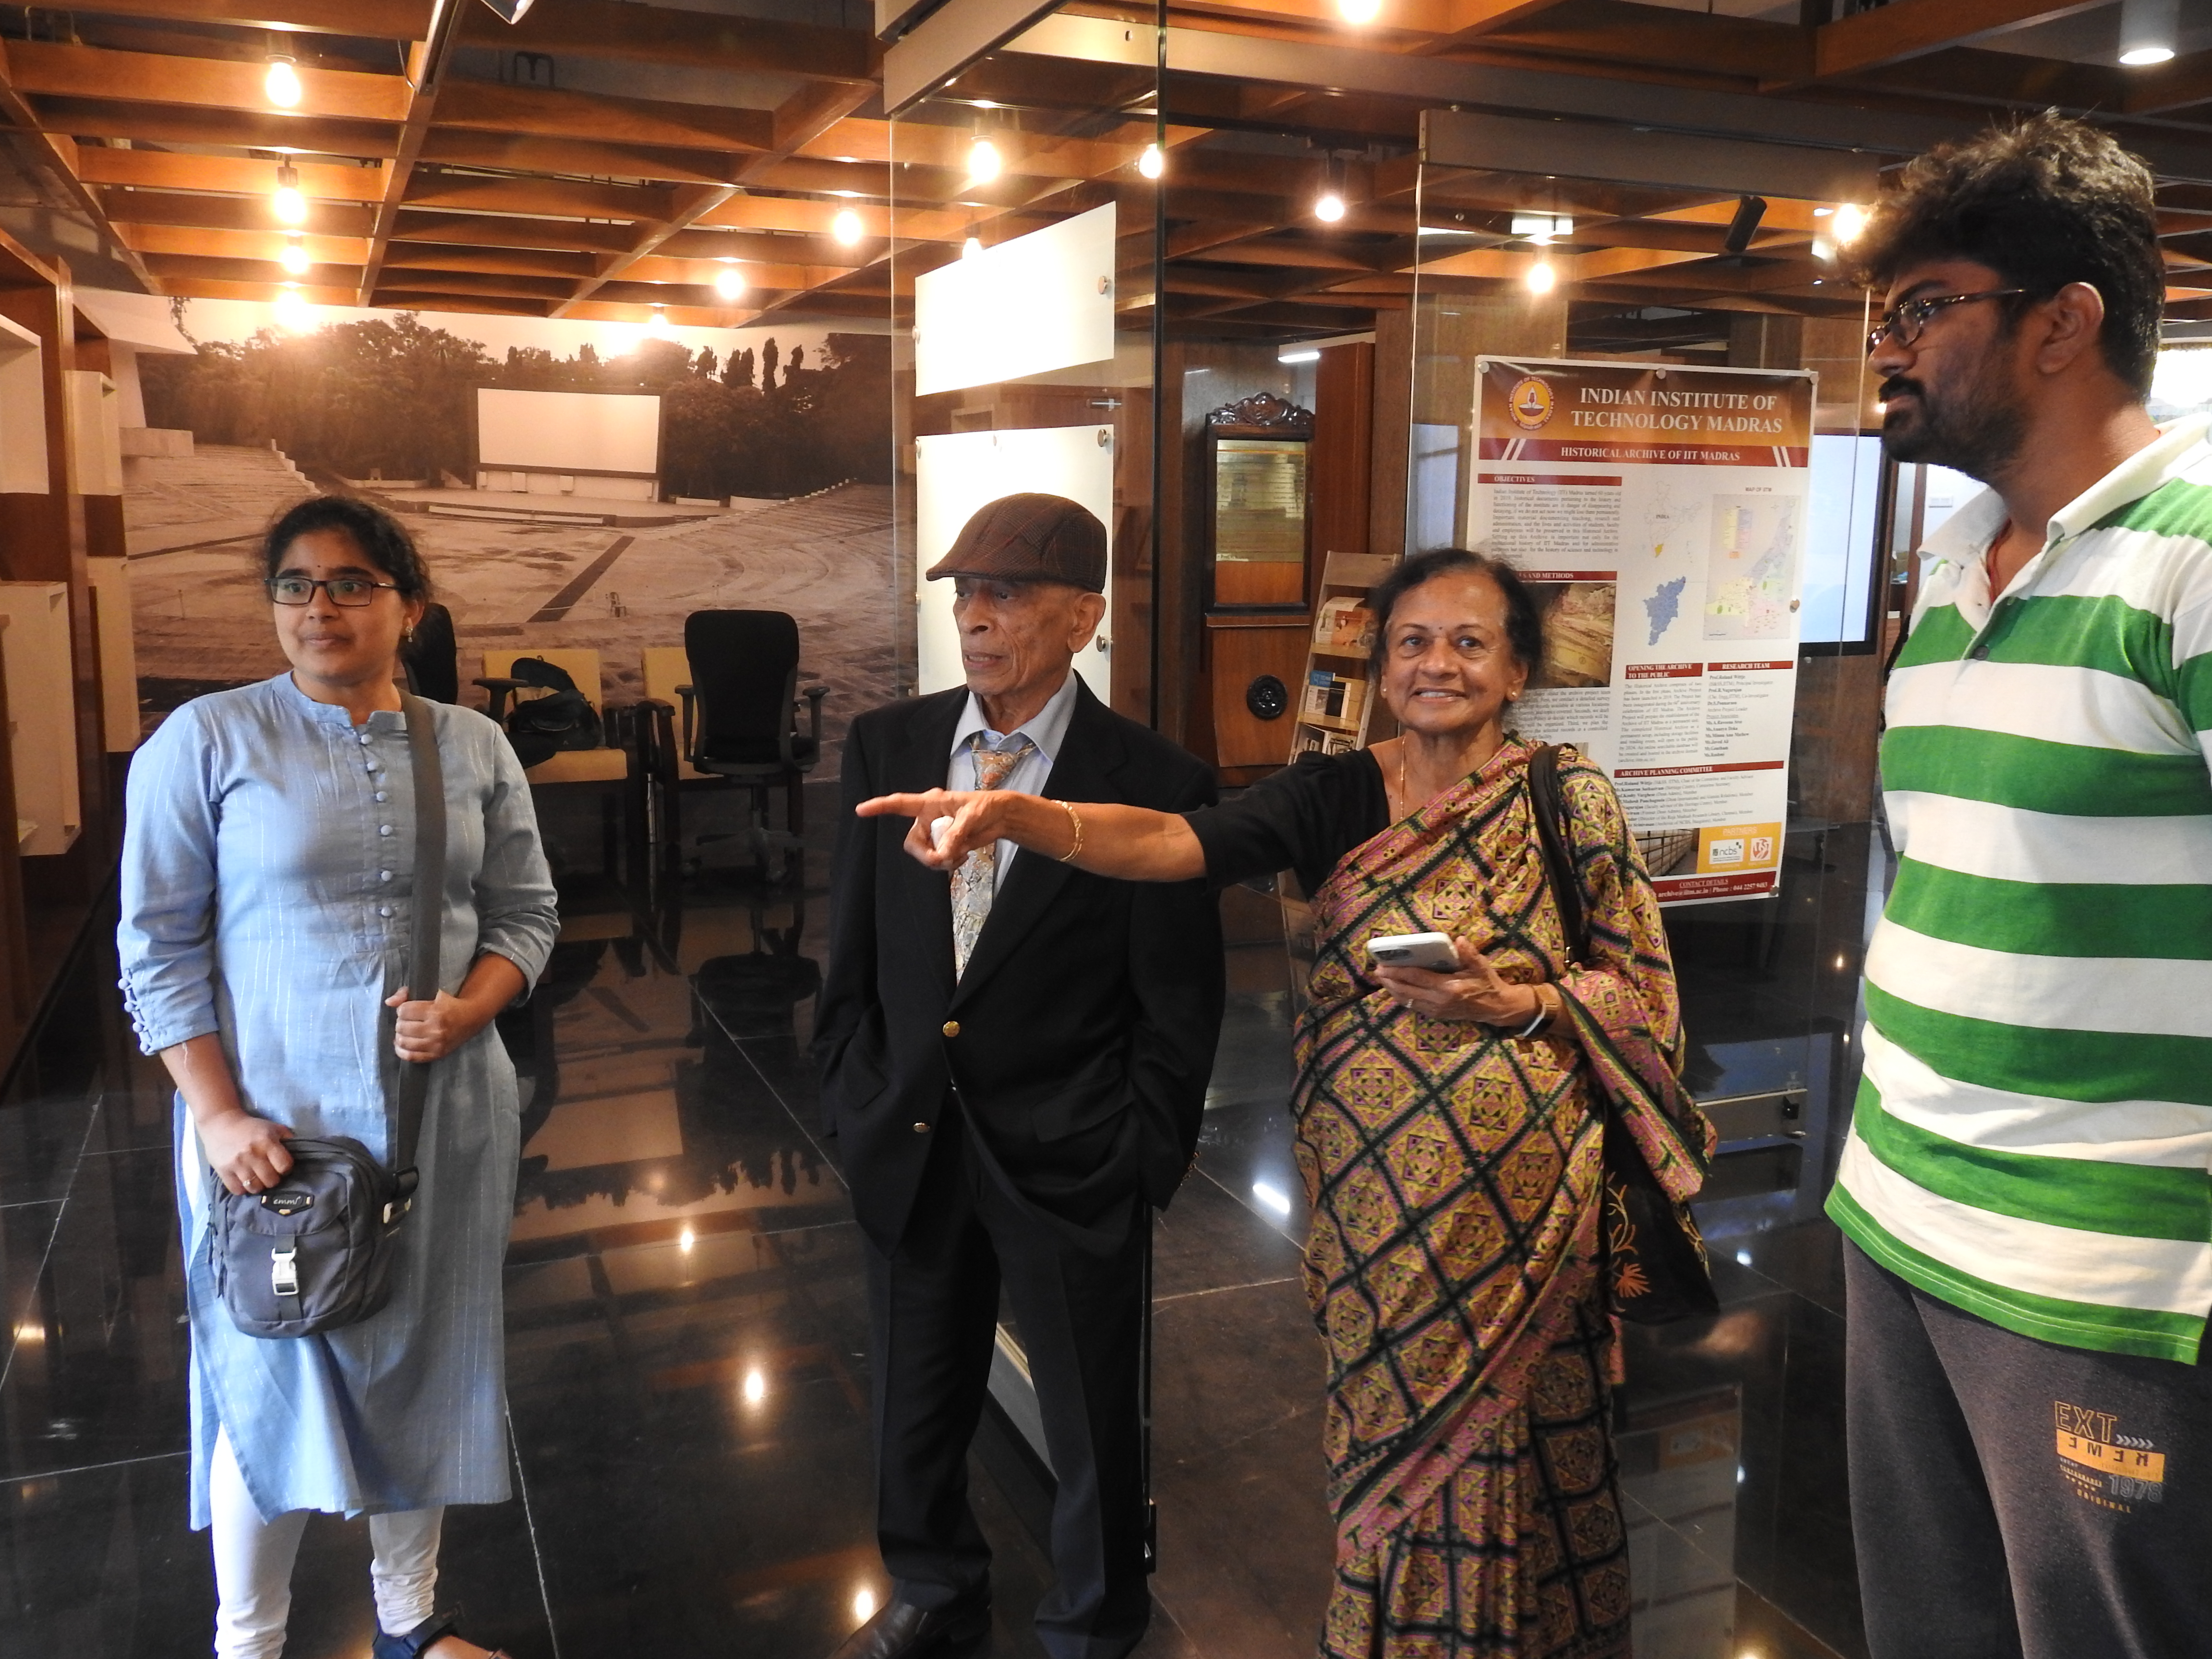 Mr. S. S. Mani Venkata and Mrs. Padma with visitors at the Heritage Centre